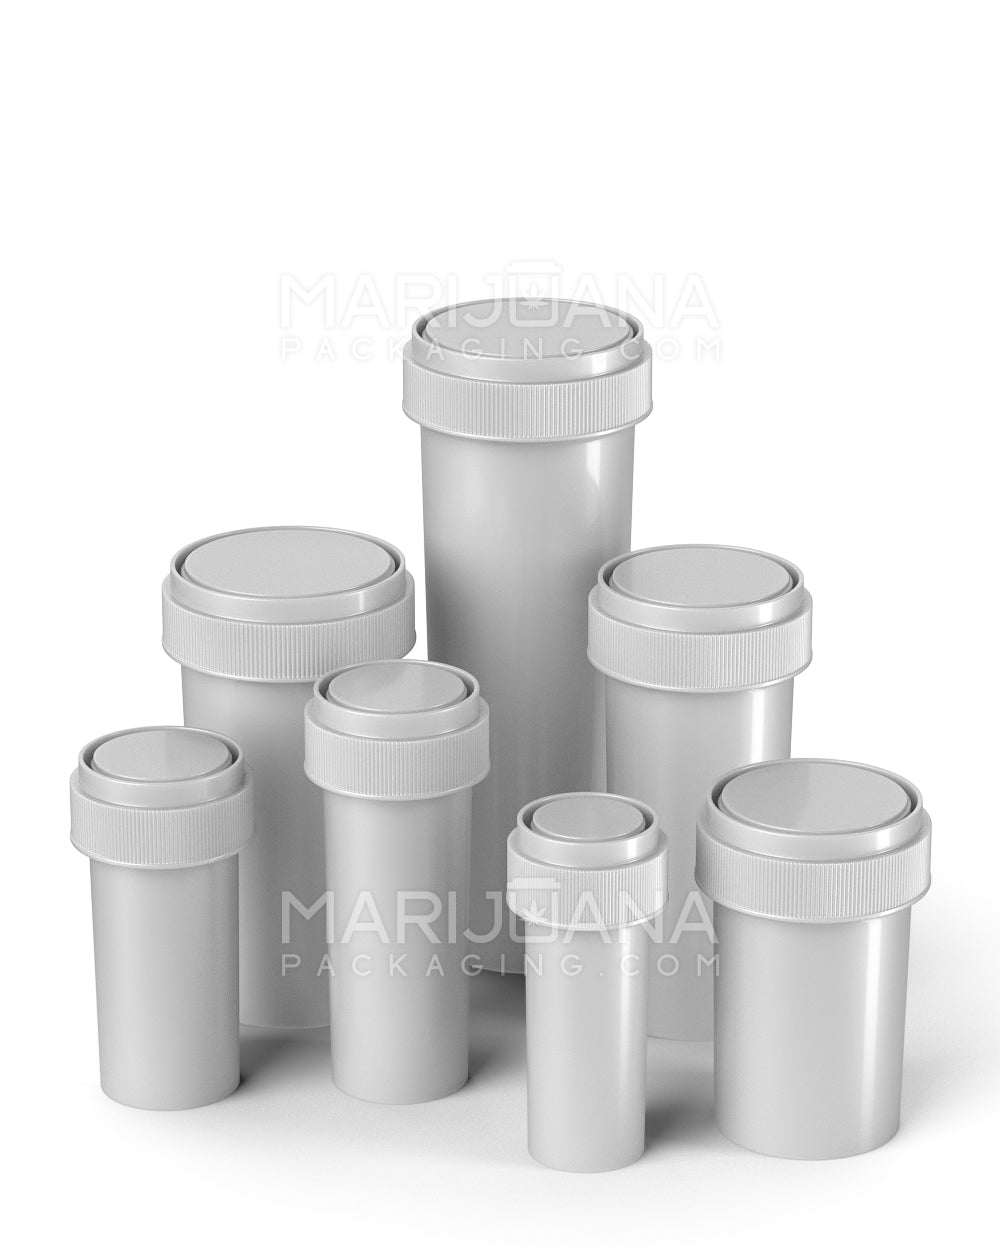 Child Resistant | Opaque Silver Blank Reversible Cap Vials | 40dr - 10g - 150 Count - 10